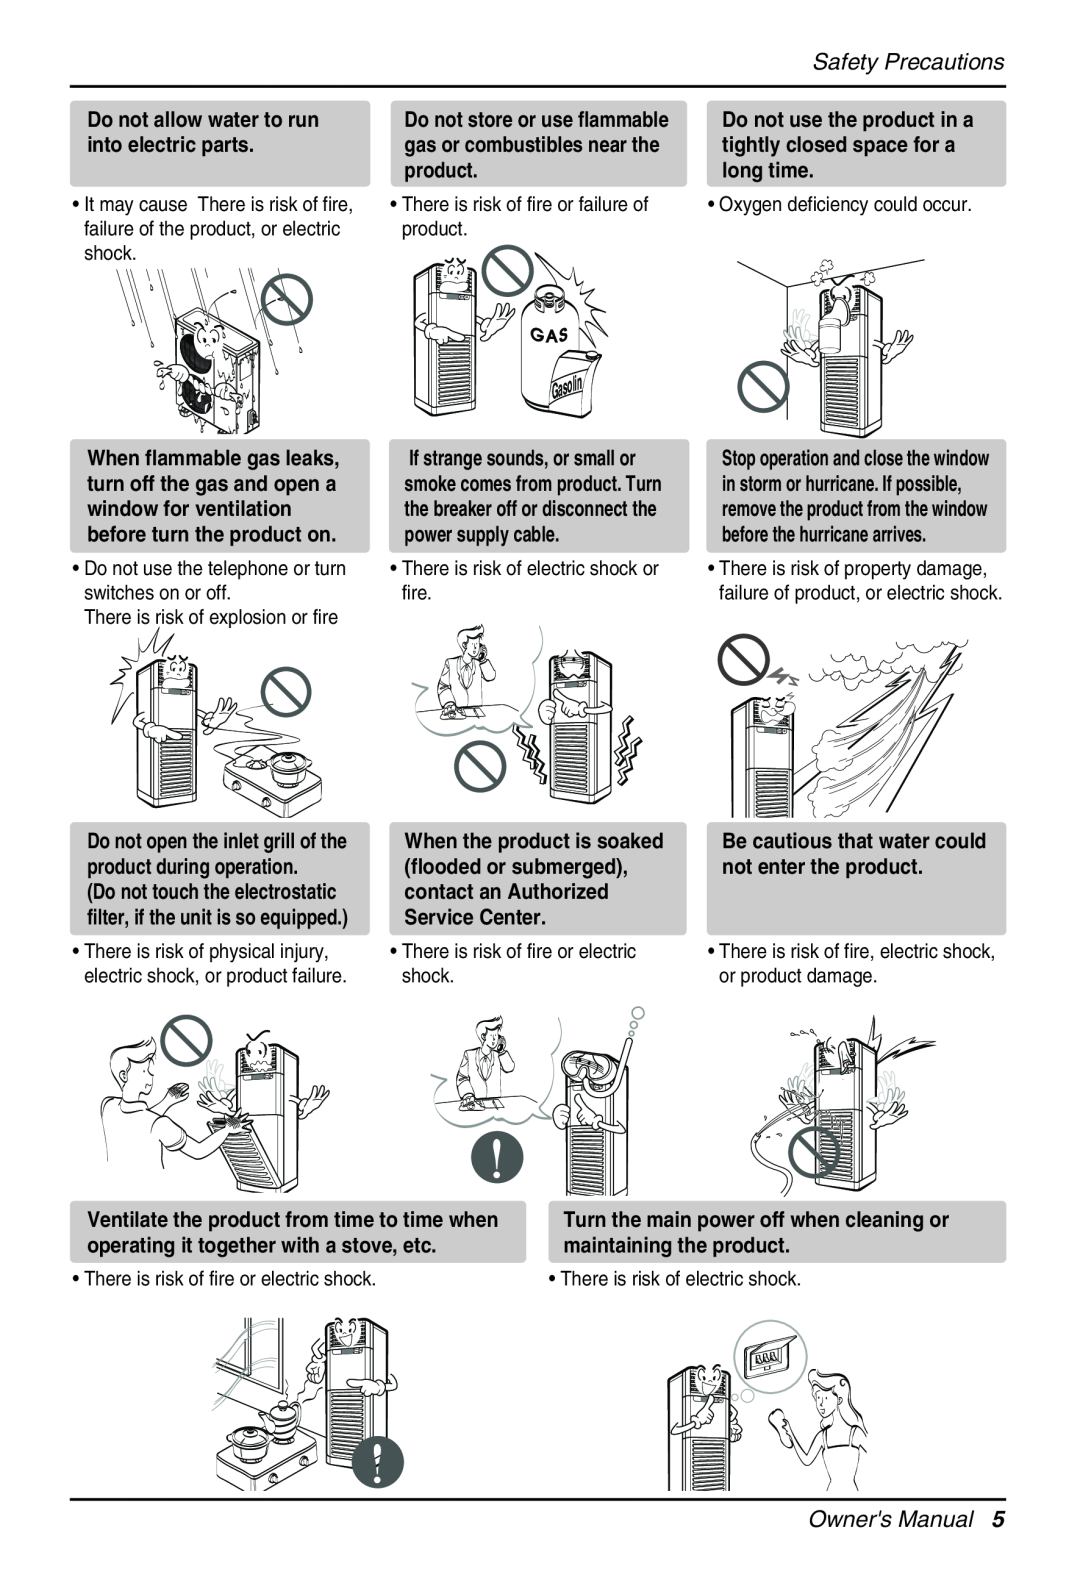 Beko LG-BKE 9300 D owner manual English, Safety Precautions, Do not allow water to run into electric parts 